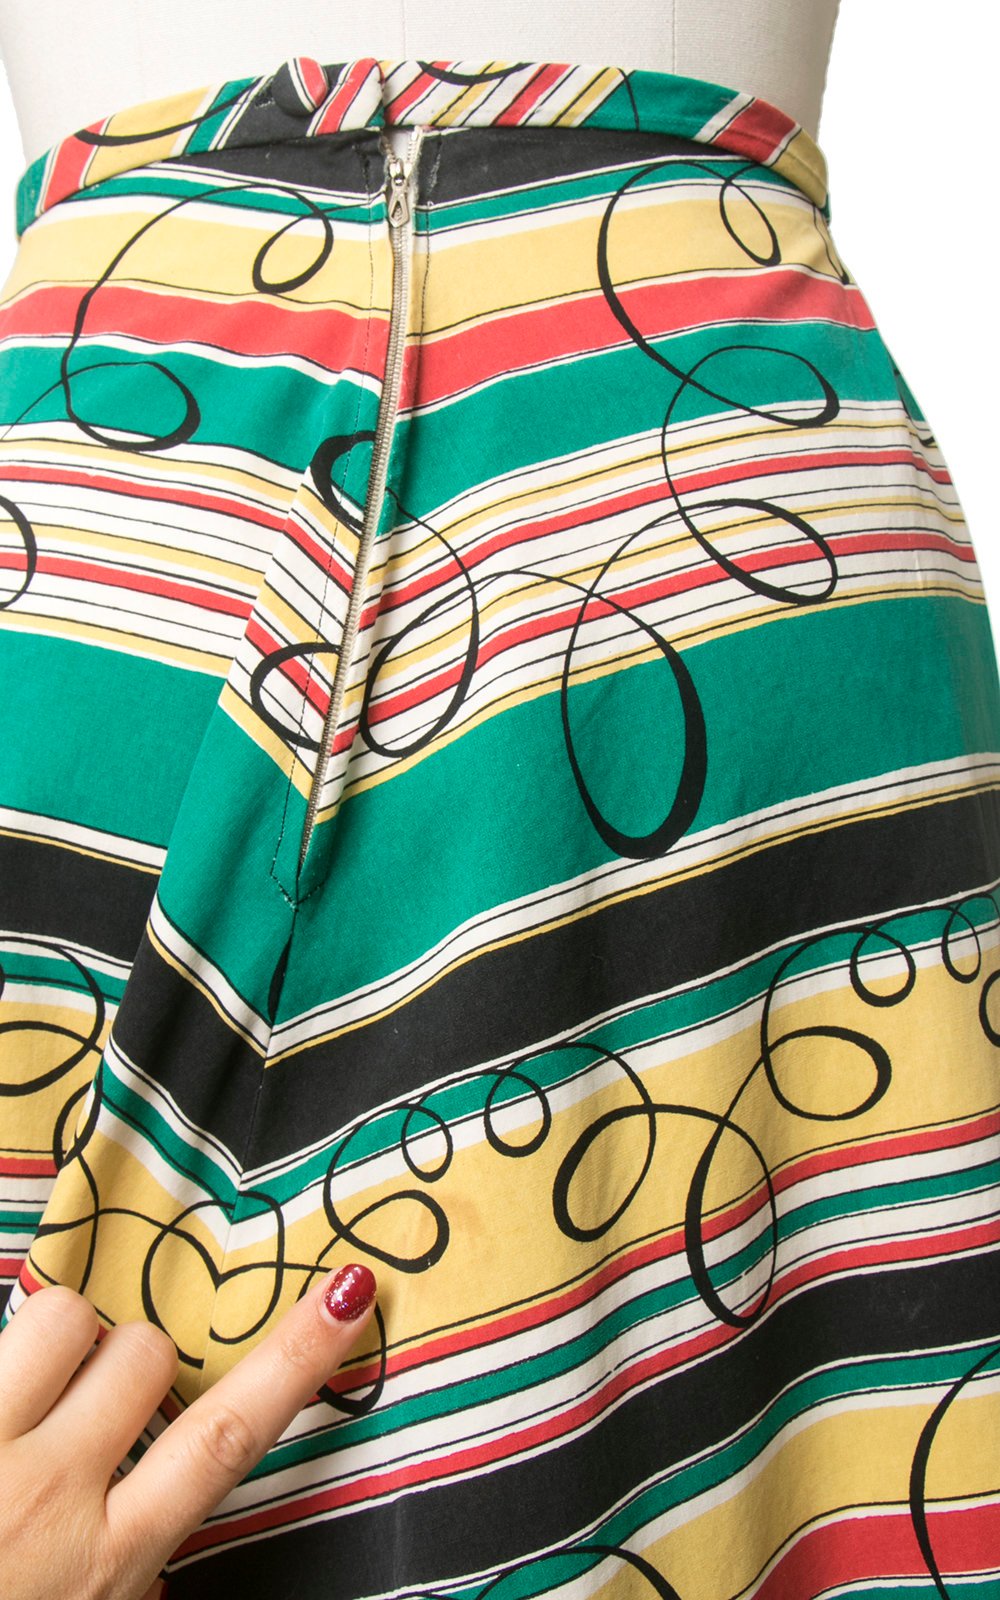 Vintage 1940s Skirt | 40s Striped Chevron Swirl Printed Colorful Cotton Full Swing Skirt (small)